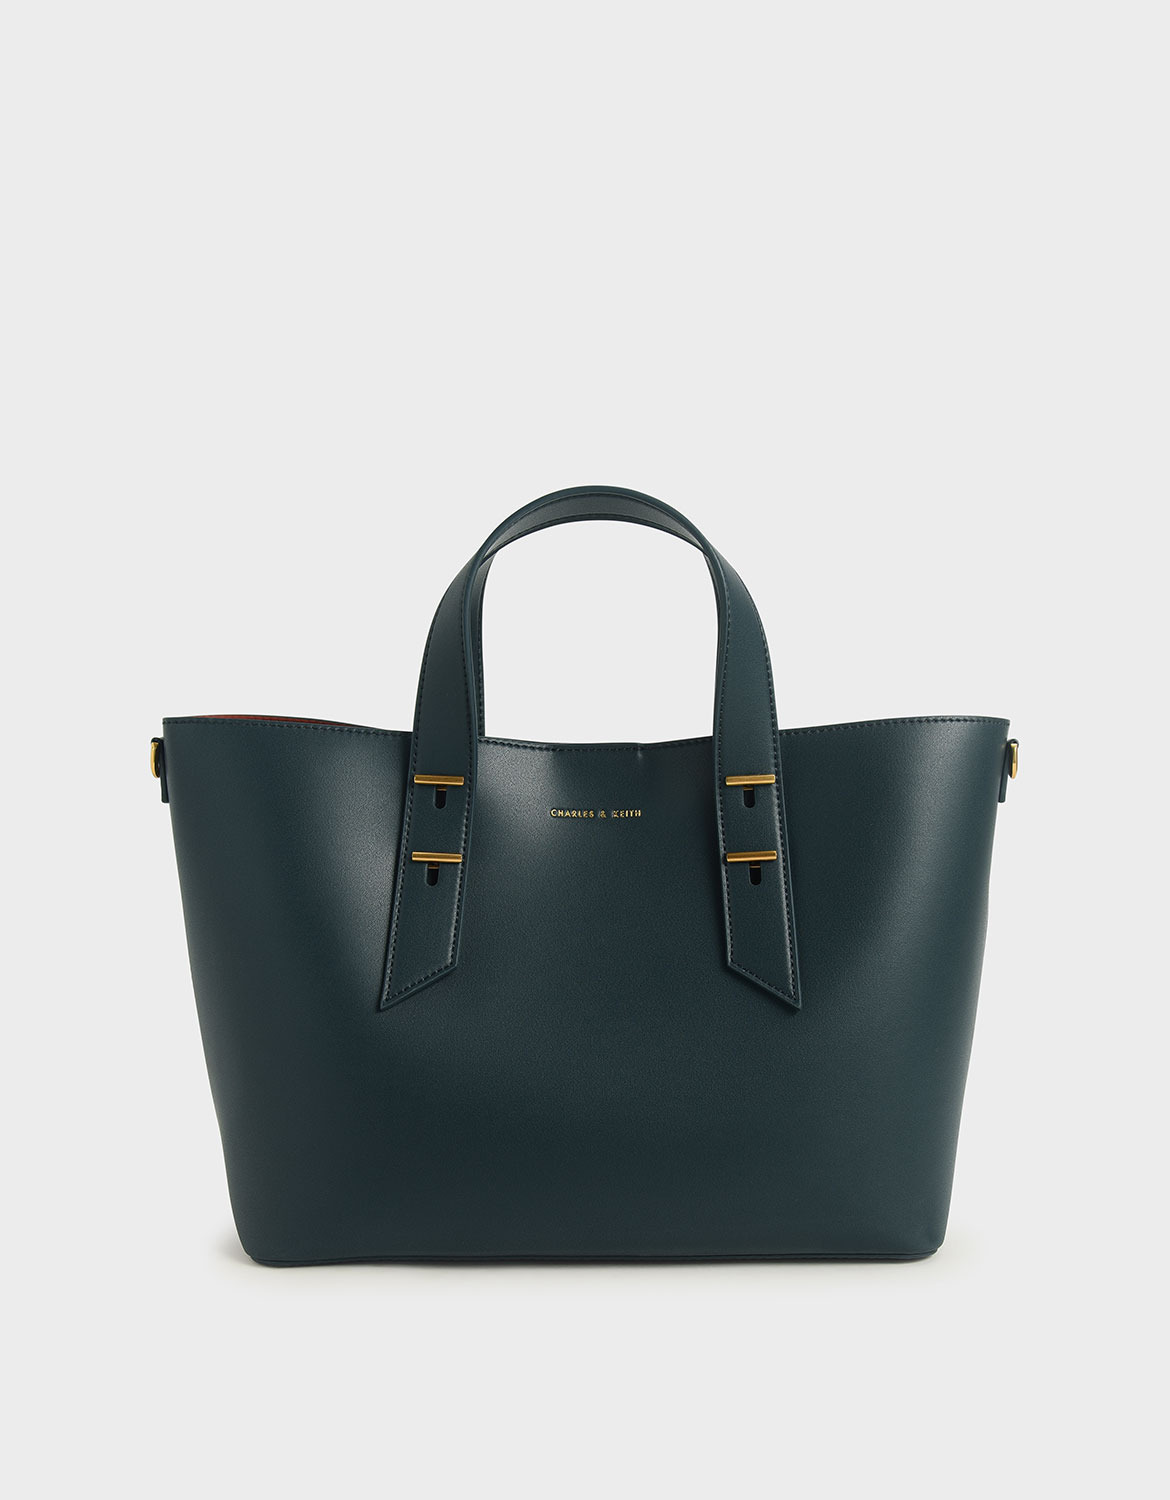 Teal Double Handle Slouchy Bag | CHARLES & KEITH HK